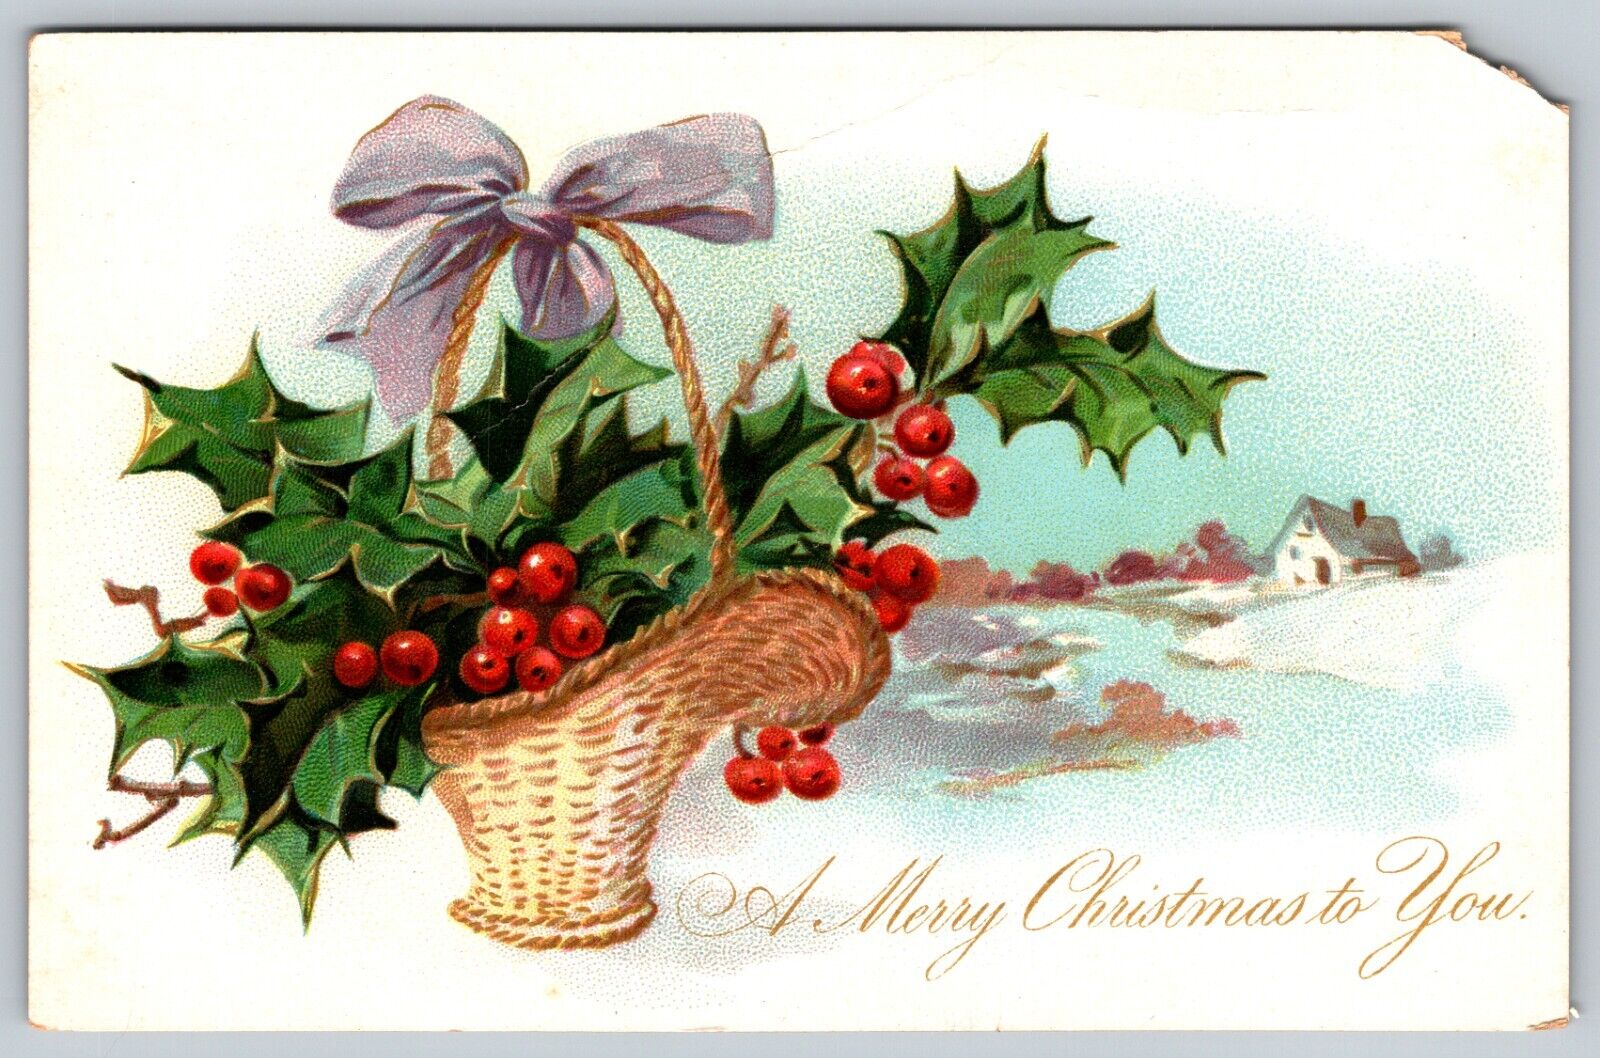 Vintage Postcard From Early 1900’s A Merry Christmas to You